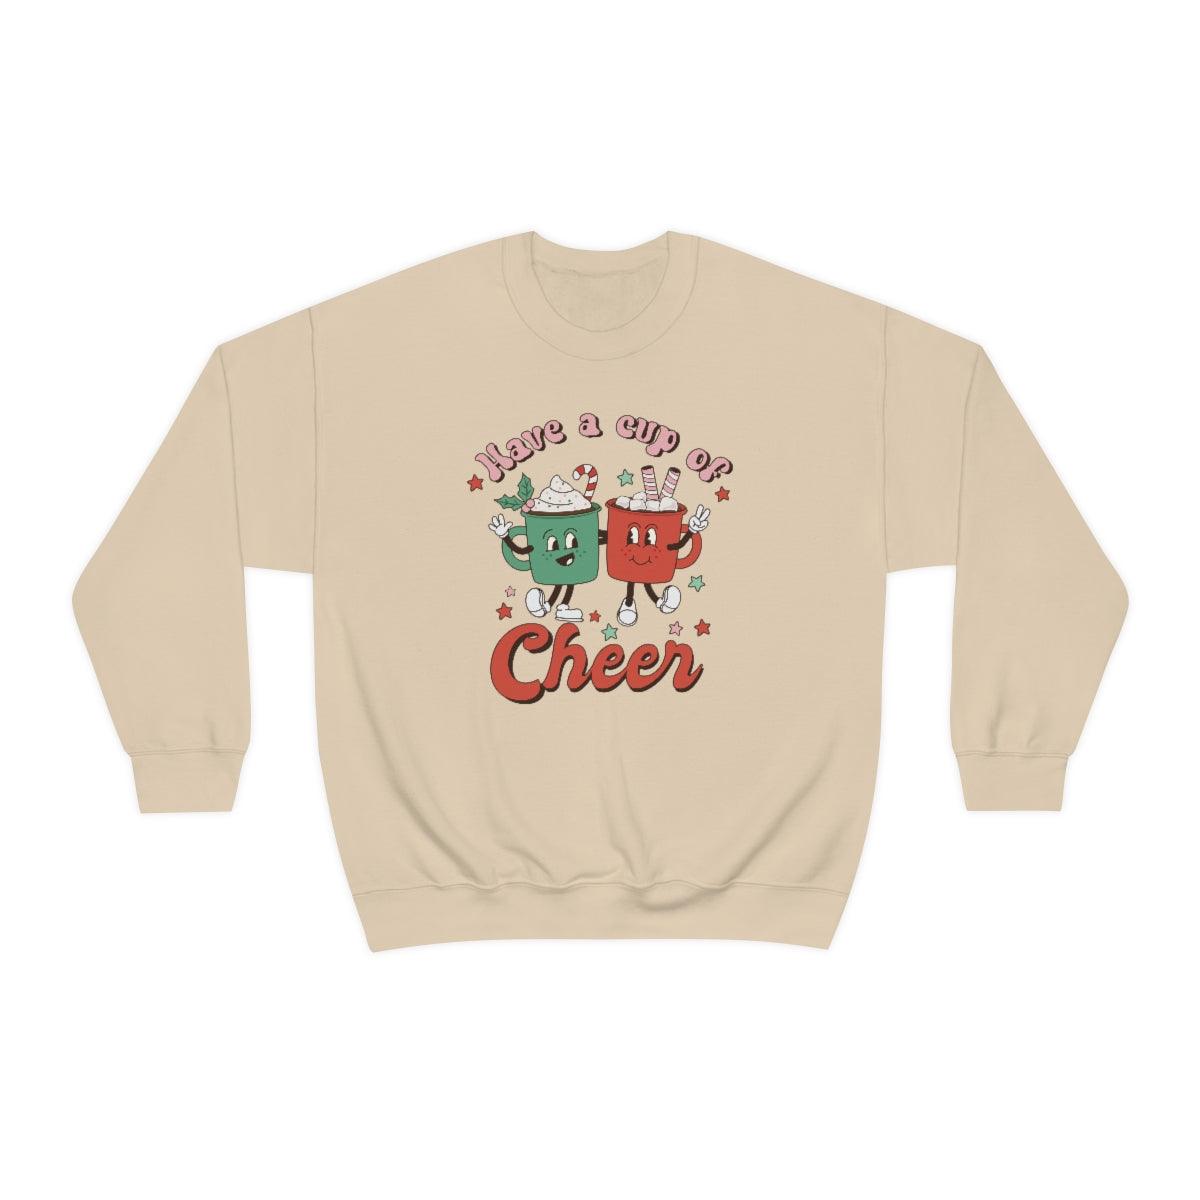 Retro Have a Cup of Christmas Cheer Christmas Crewneck Sweater - Crystal Rose Design Co.